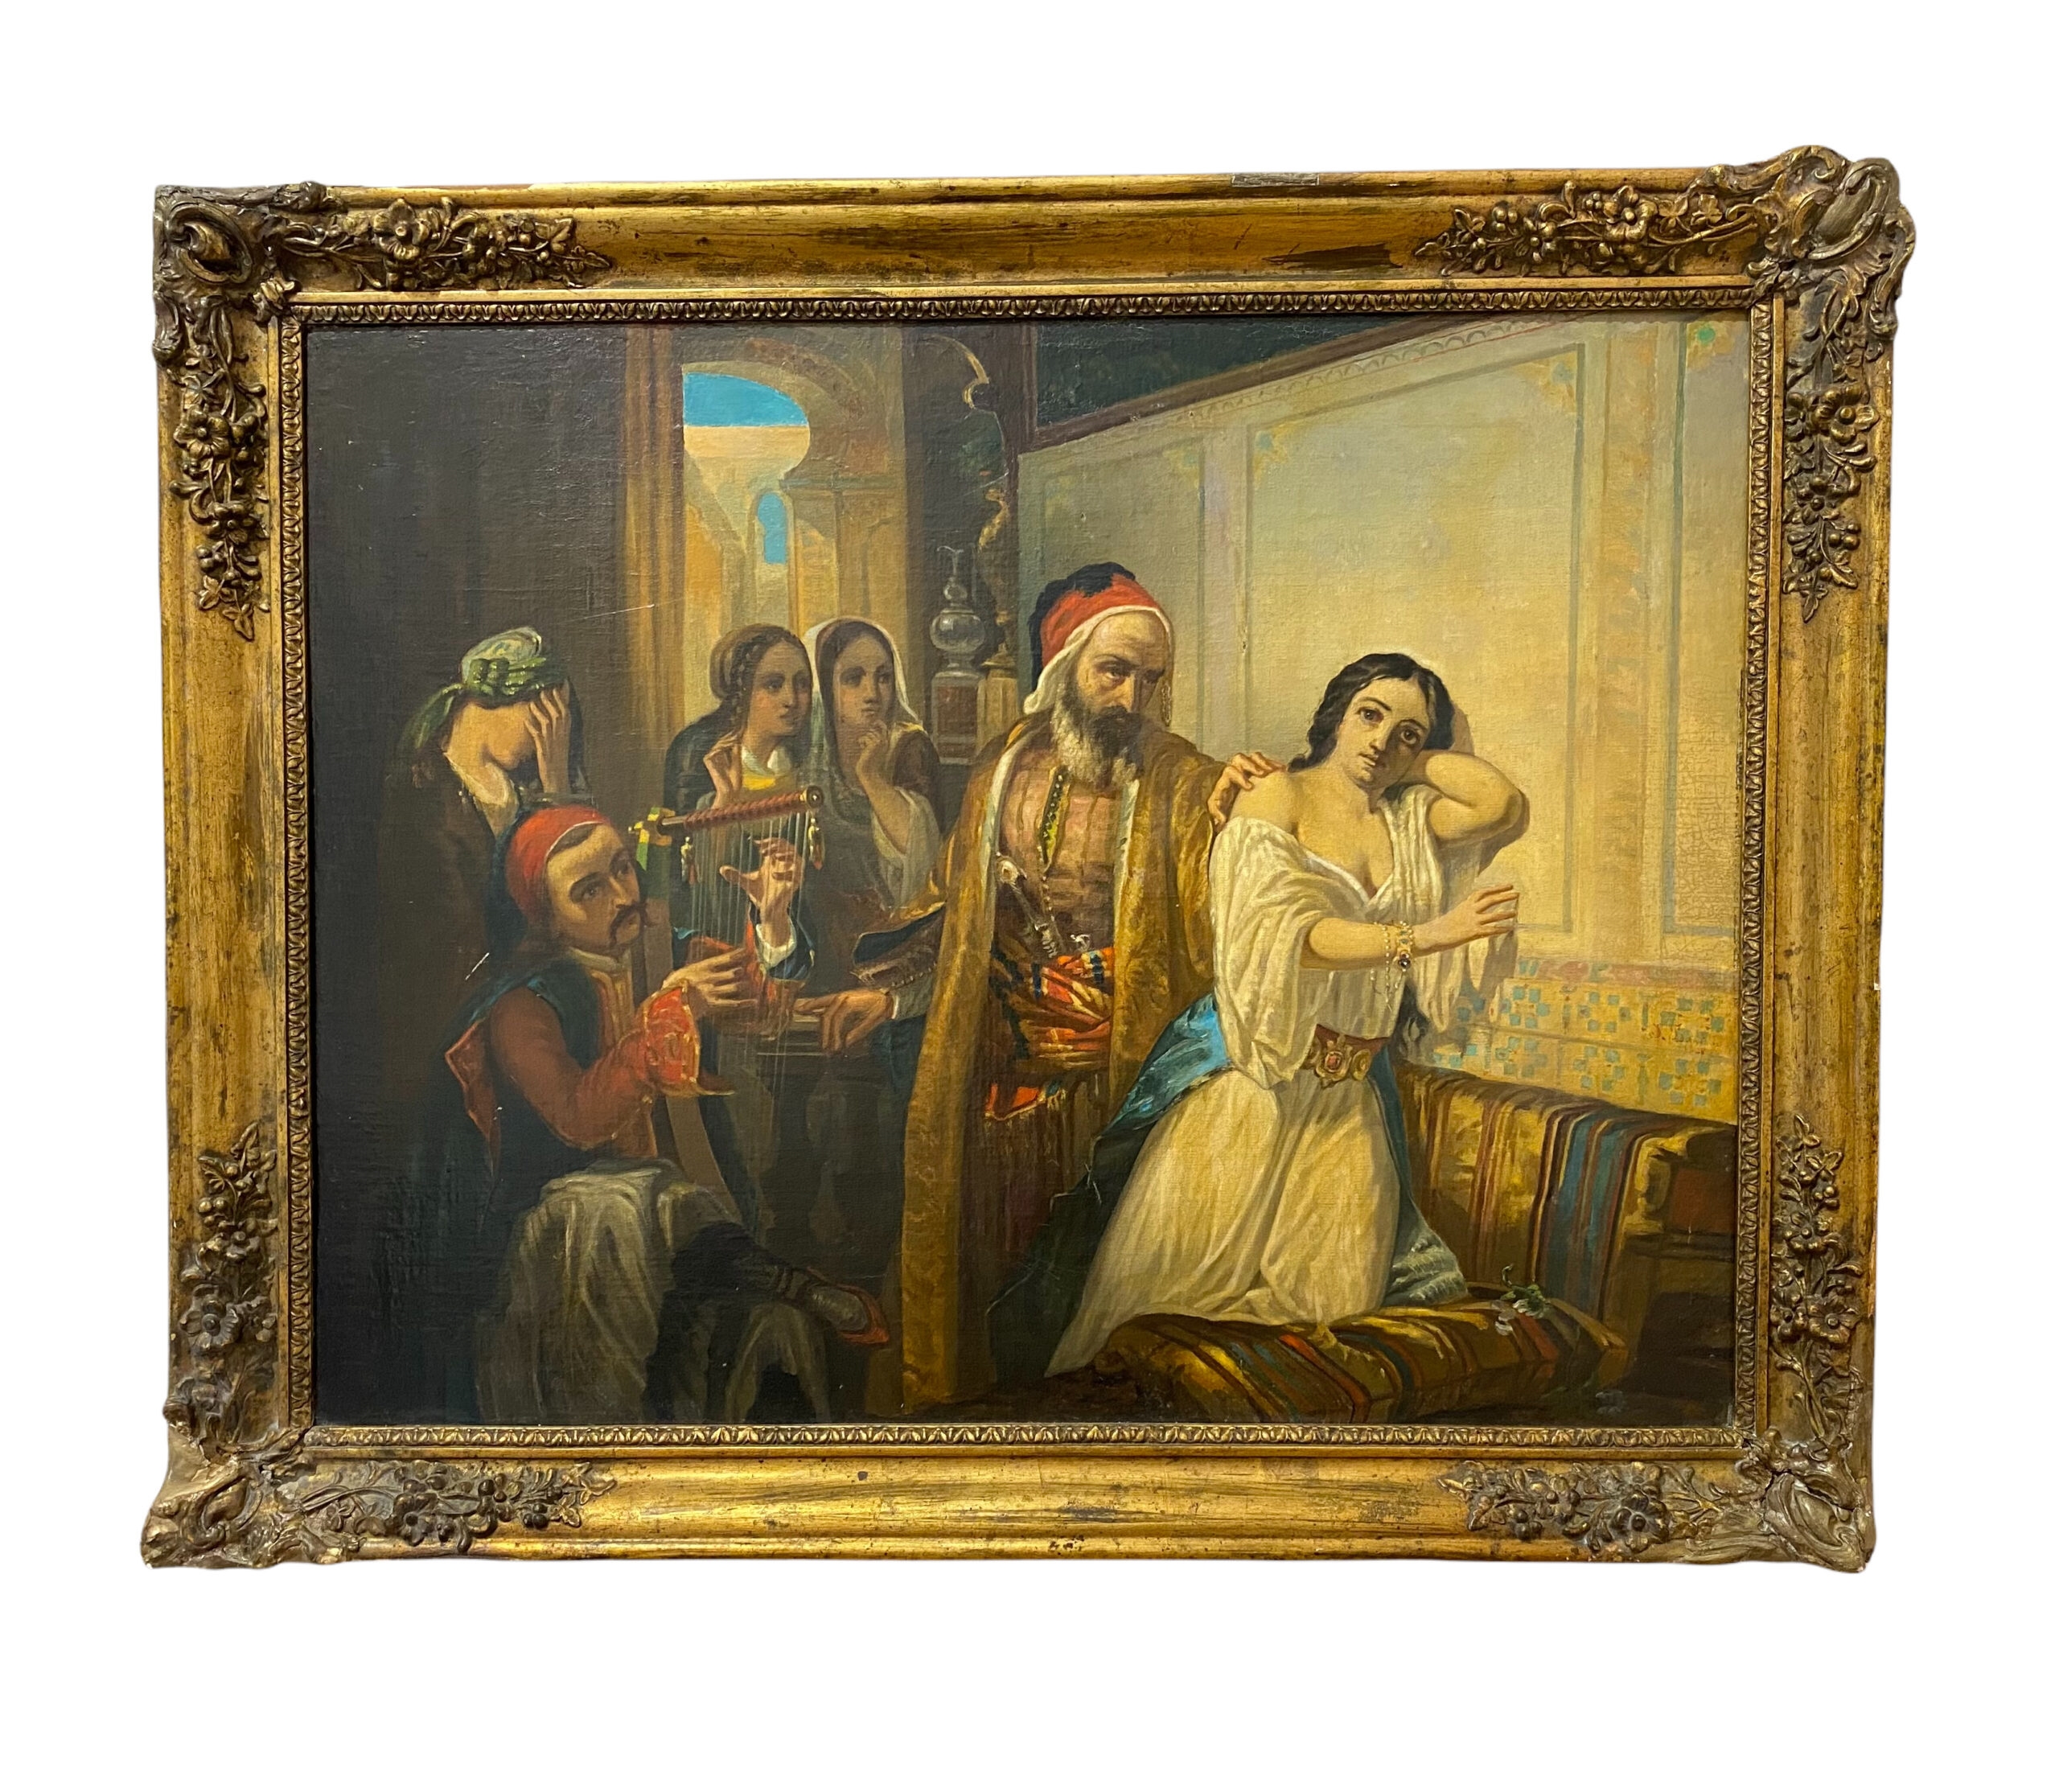 The Sultan is grabbing a young Greek woman in a slave market by Orientalist School, dated 1869